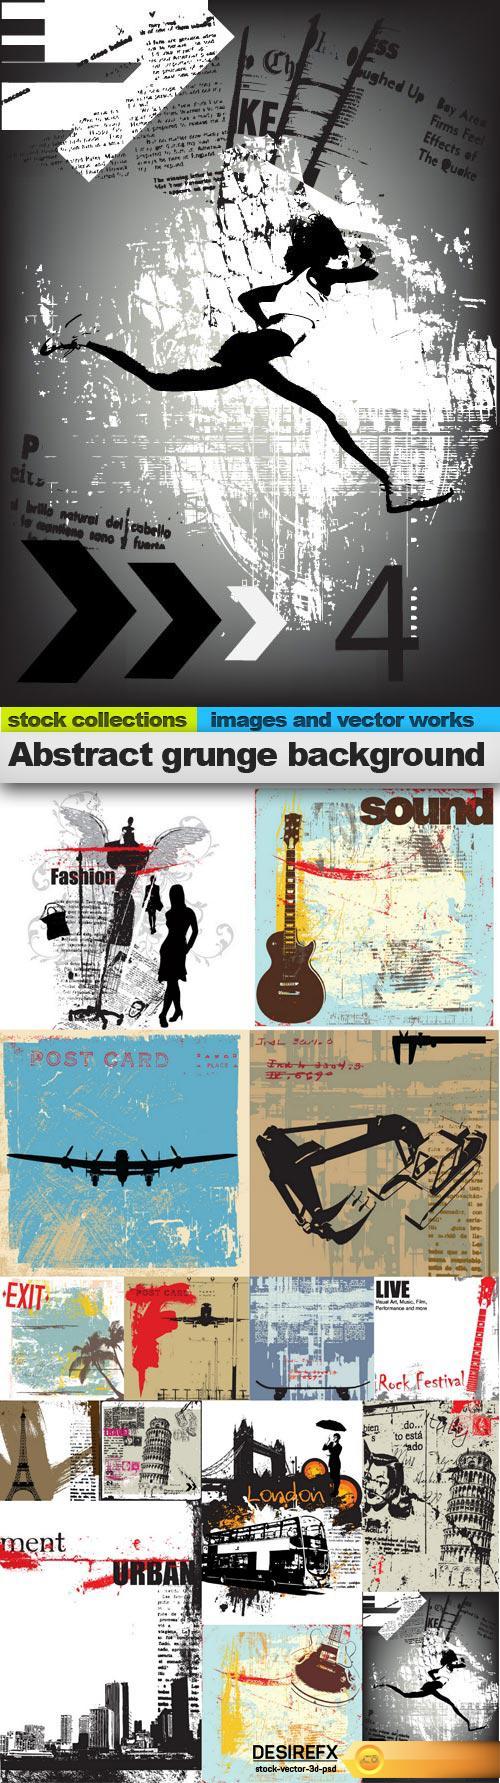 Abstract grunge background vector, 15 x EPS